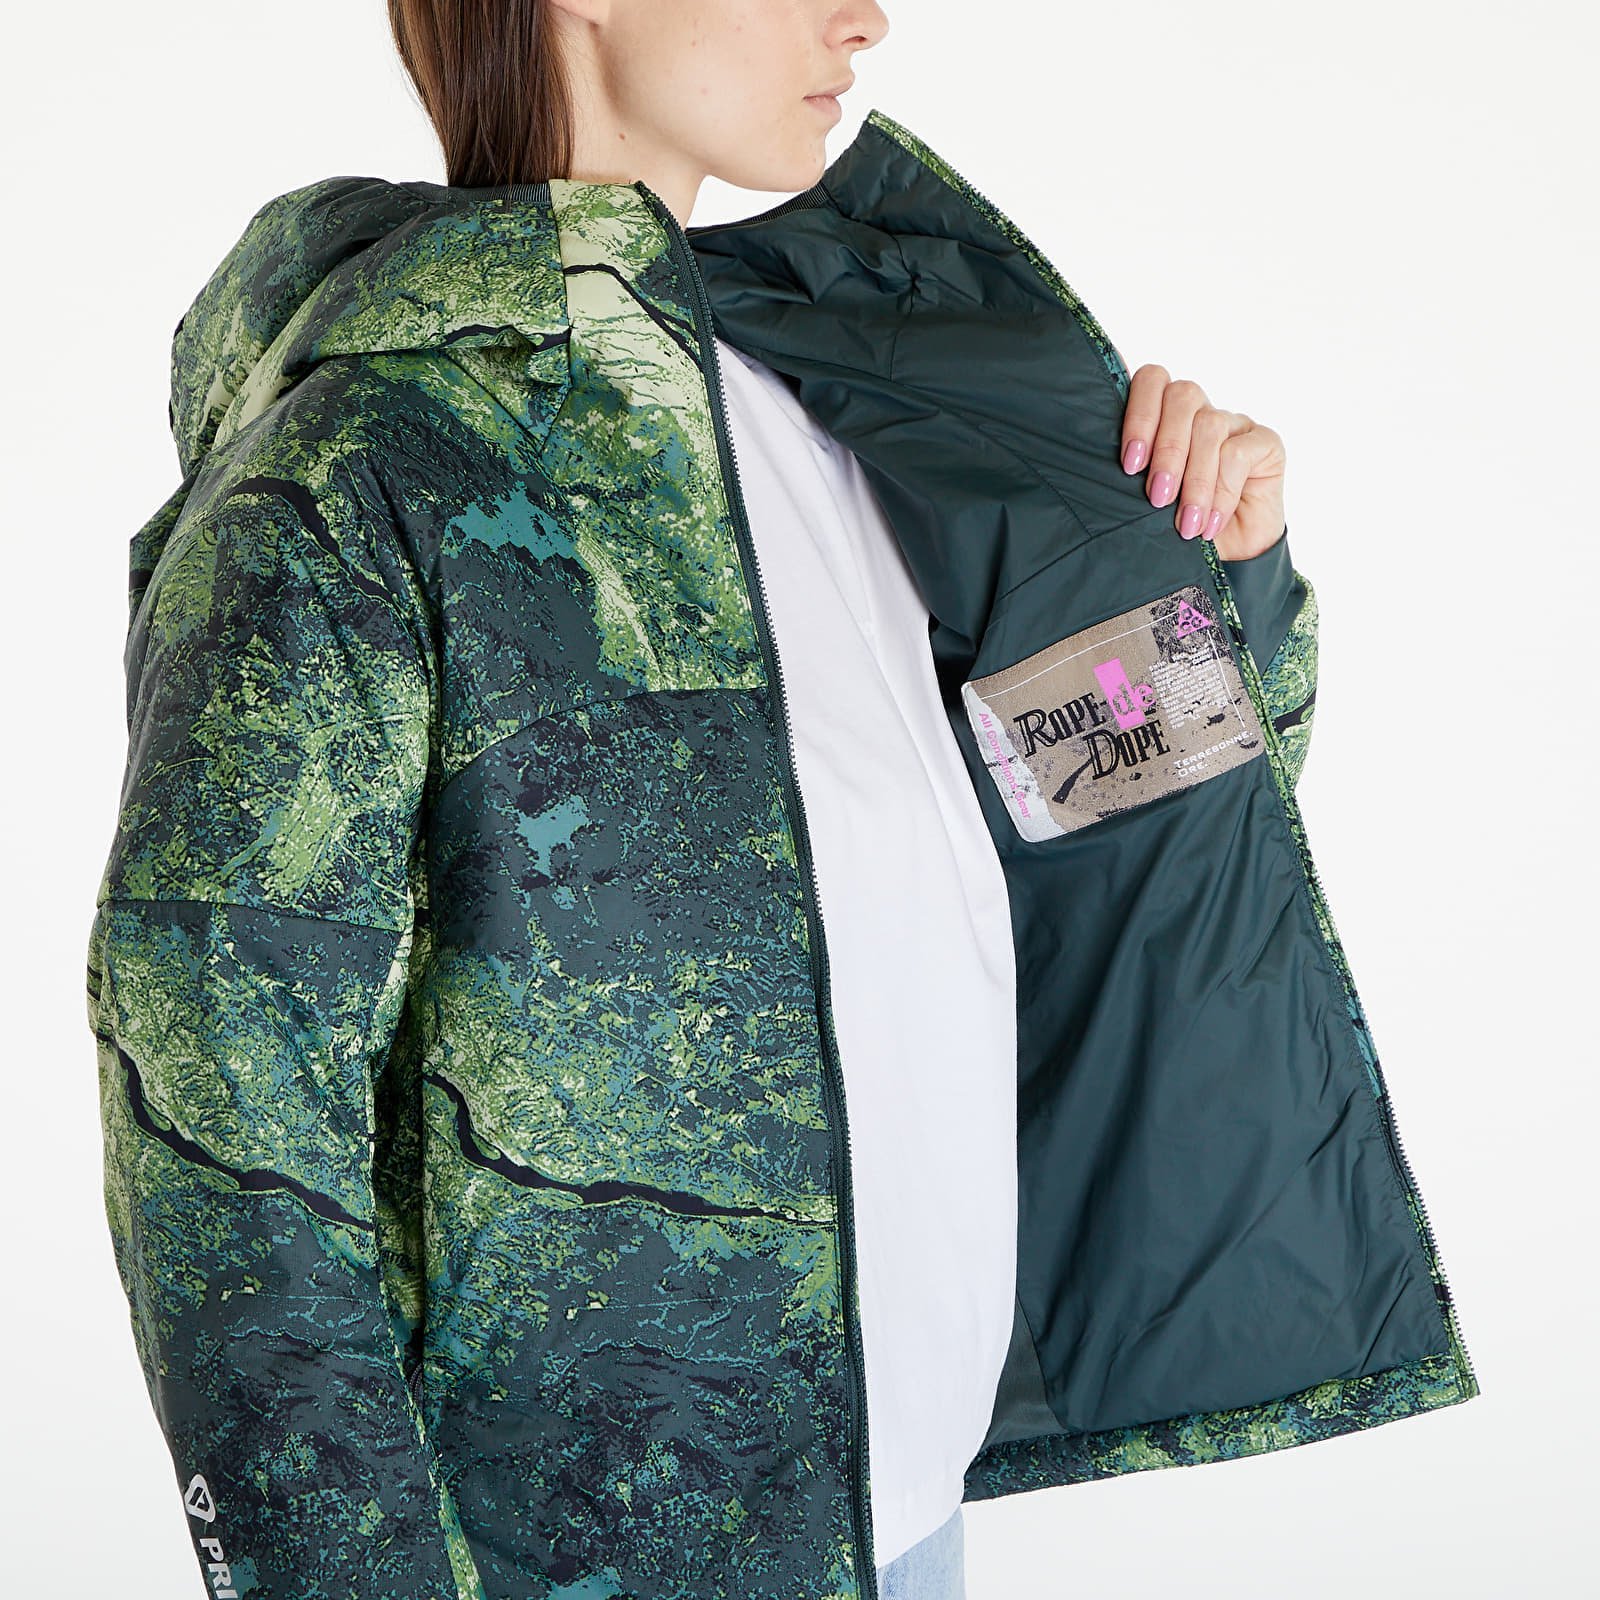 Therma-FIT ADV "Rope de Dope" Jacket Green